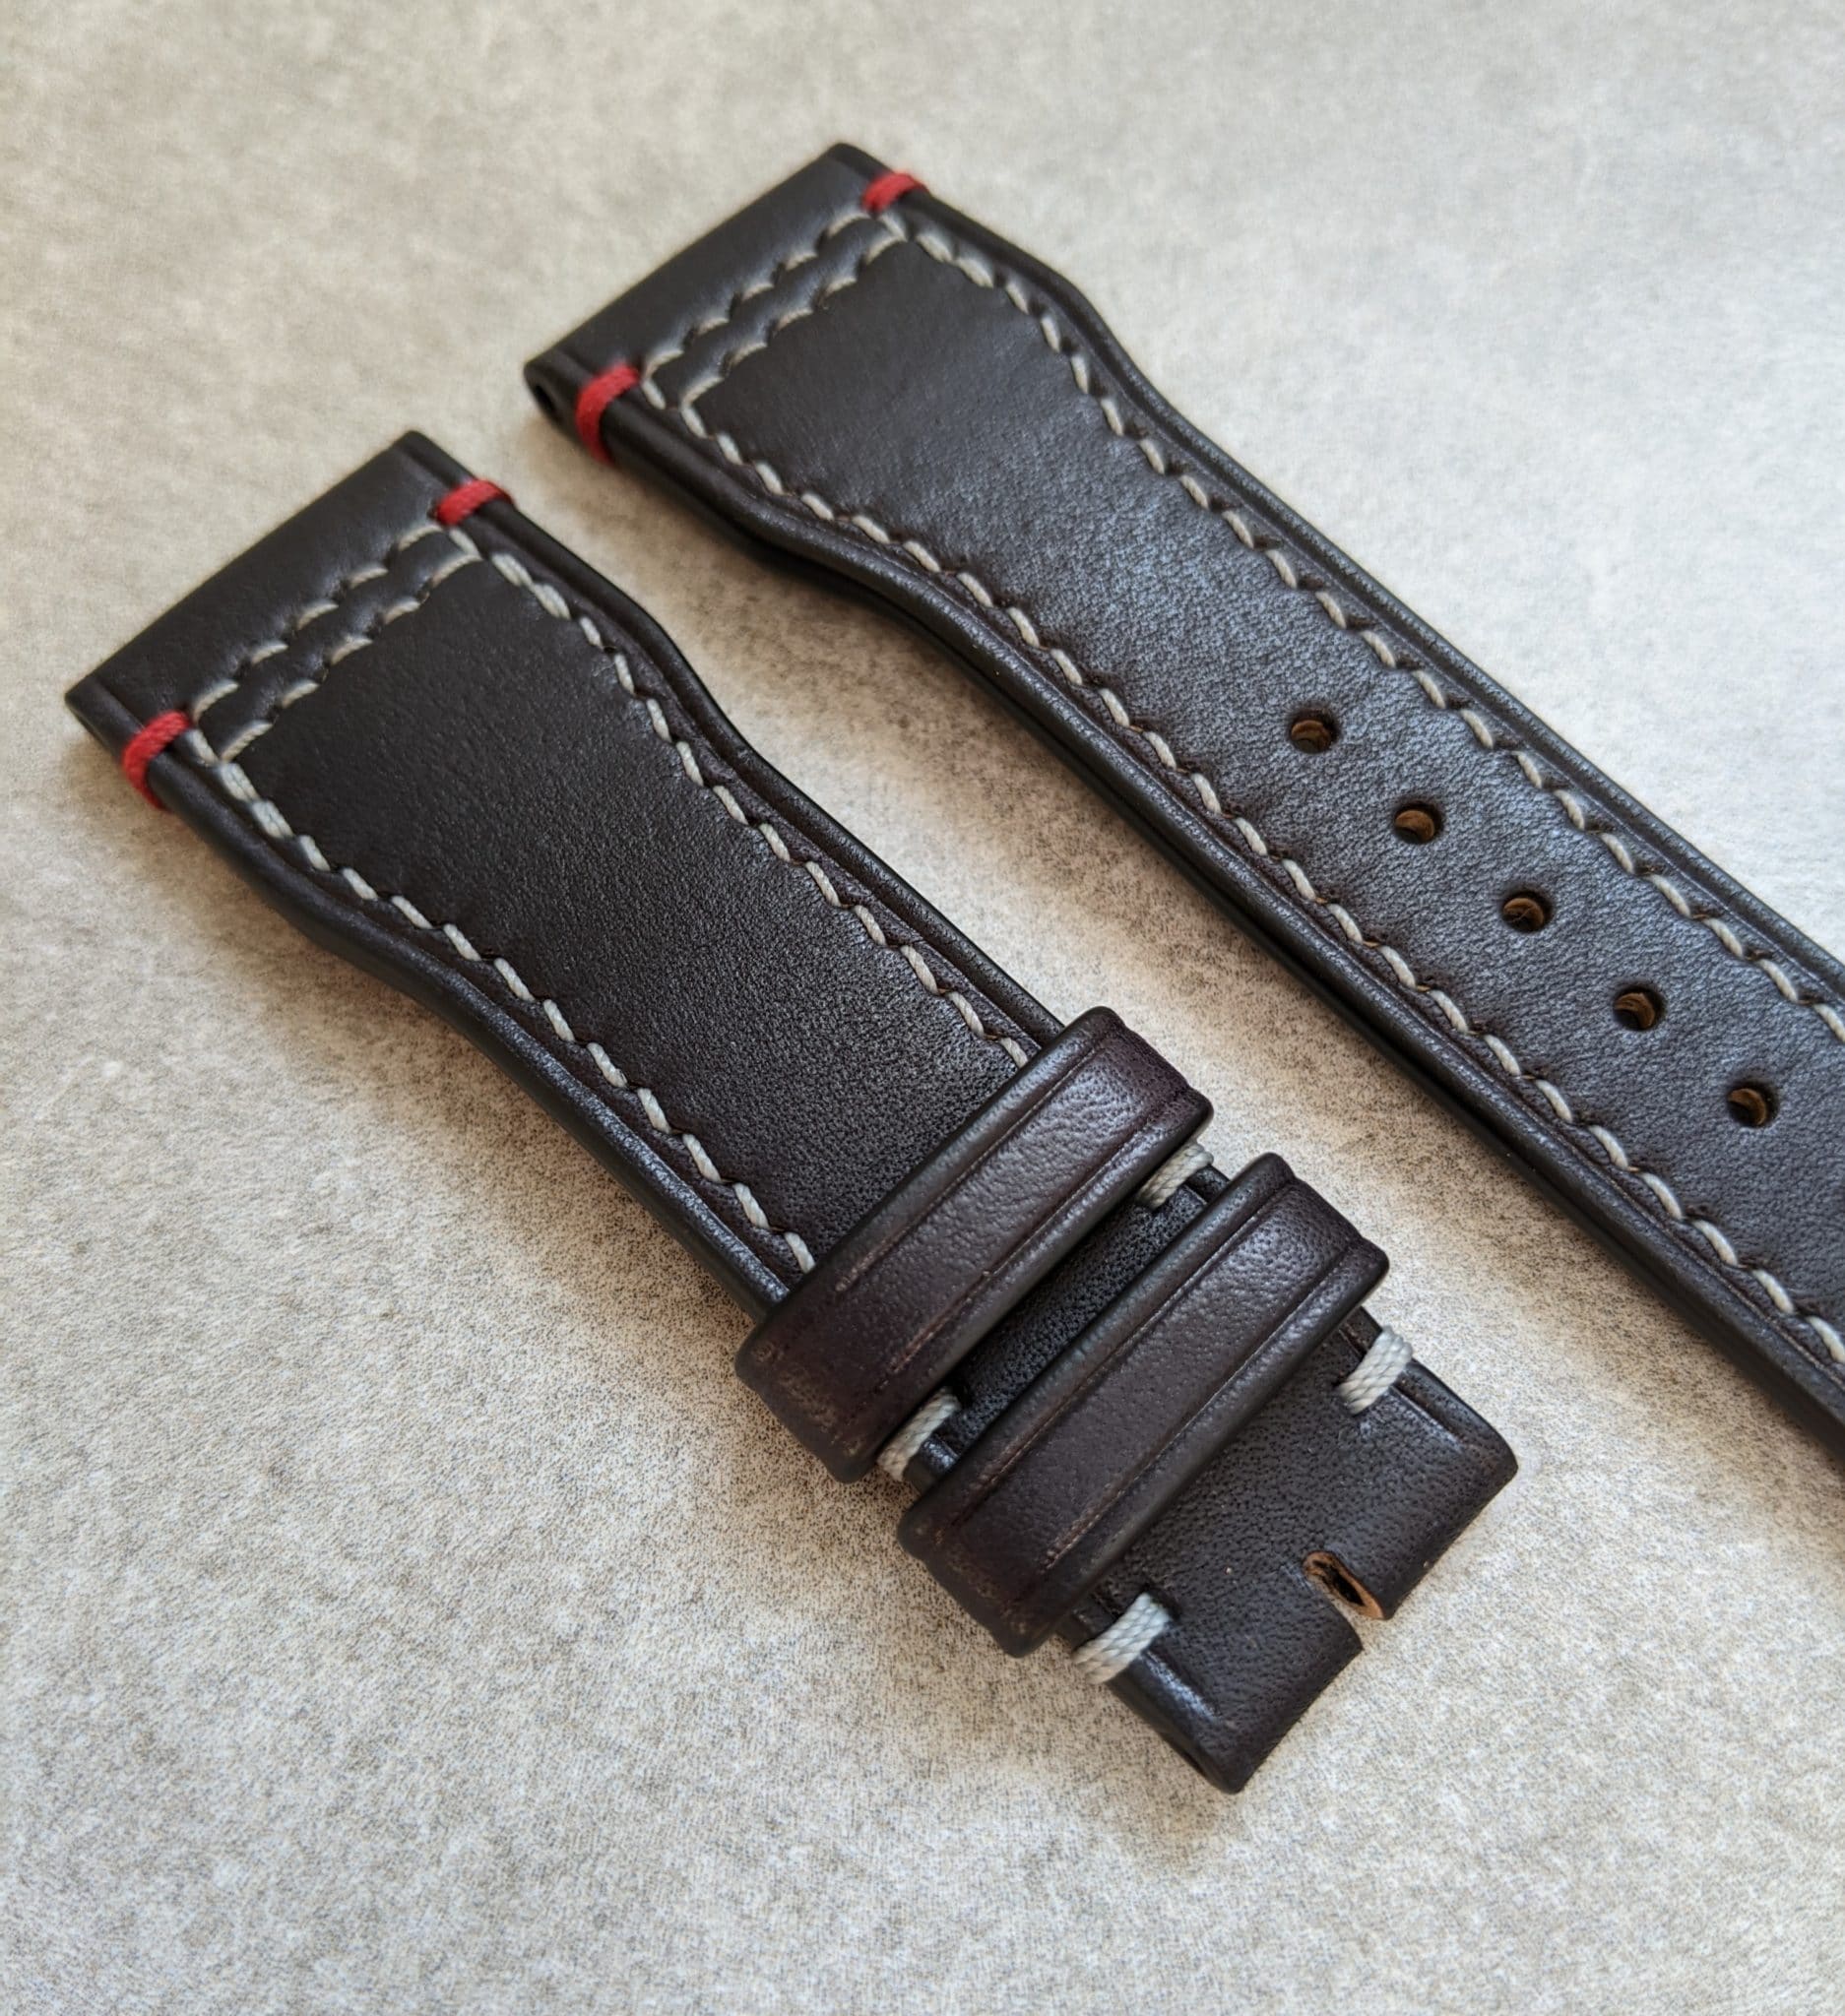 French Calfskin IWC Style Strap - Black with contrast stitching - The Strap Tailor